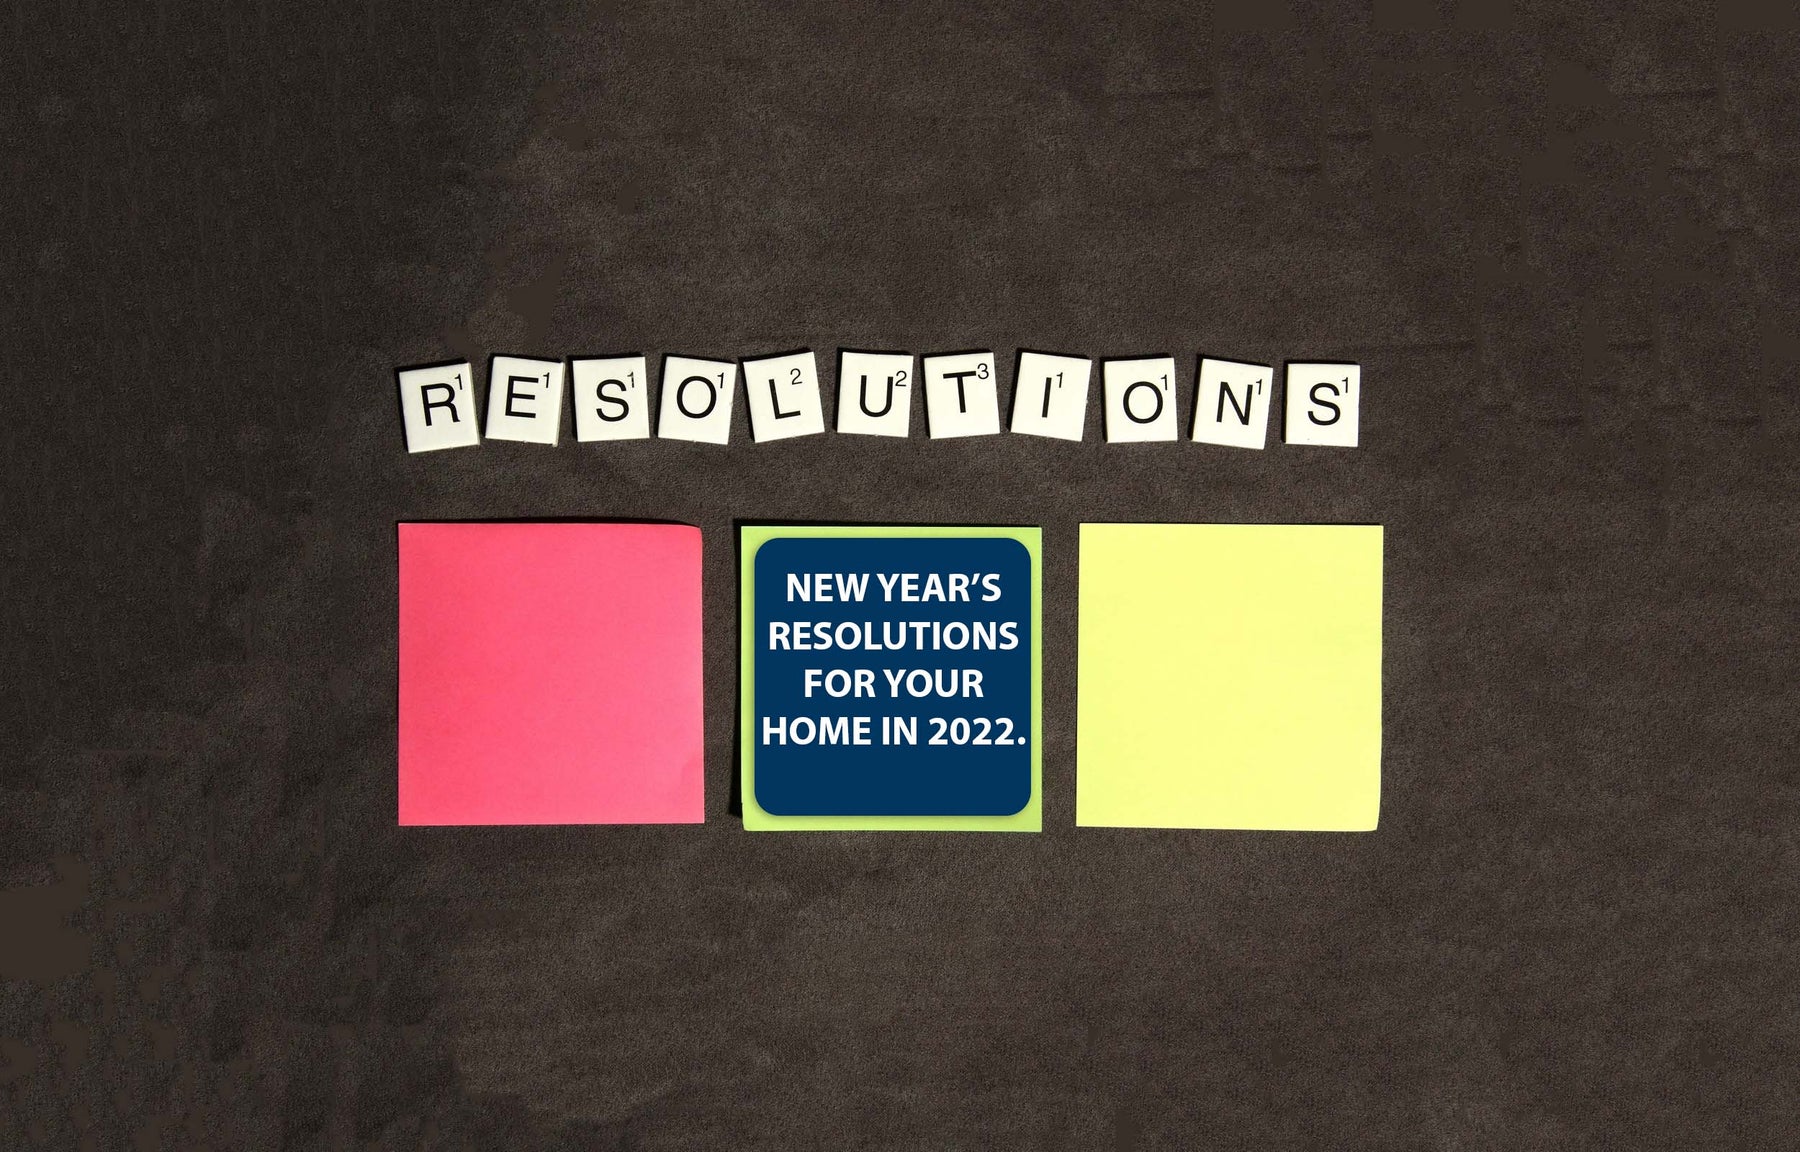 New Year’s Resolutions for Your Home in 2022!